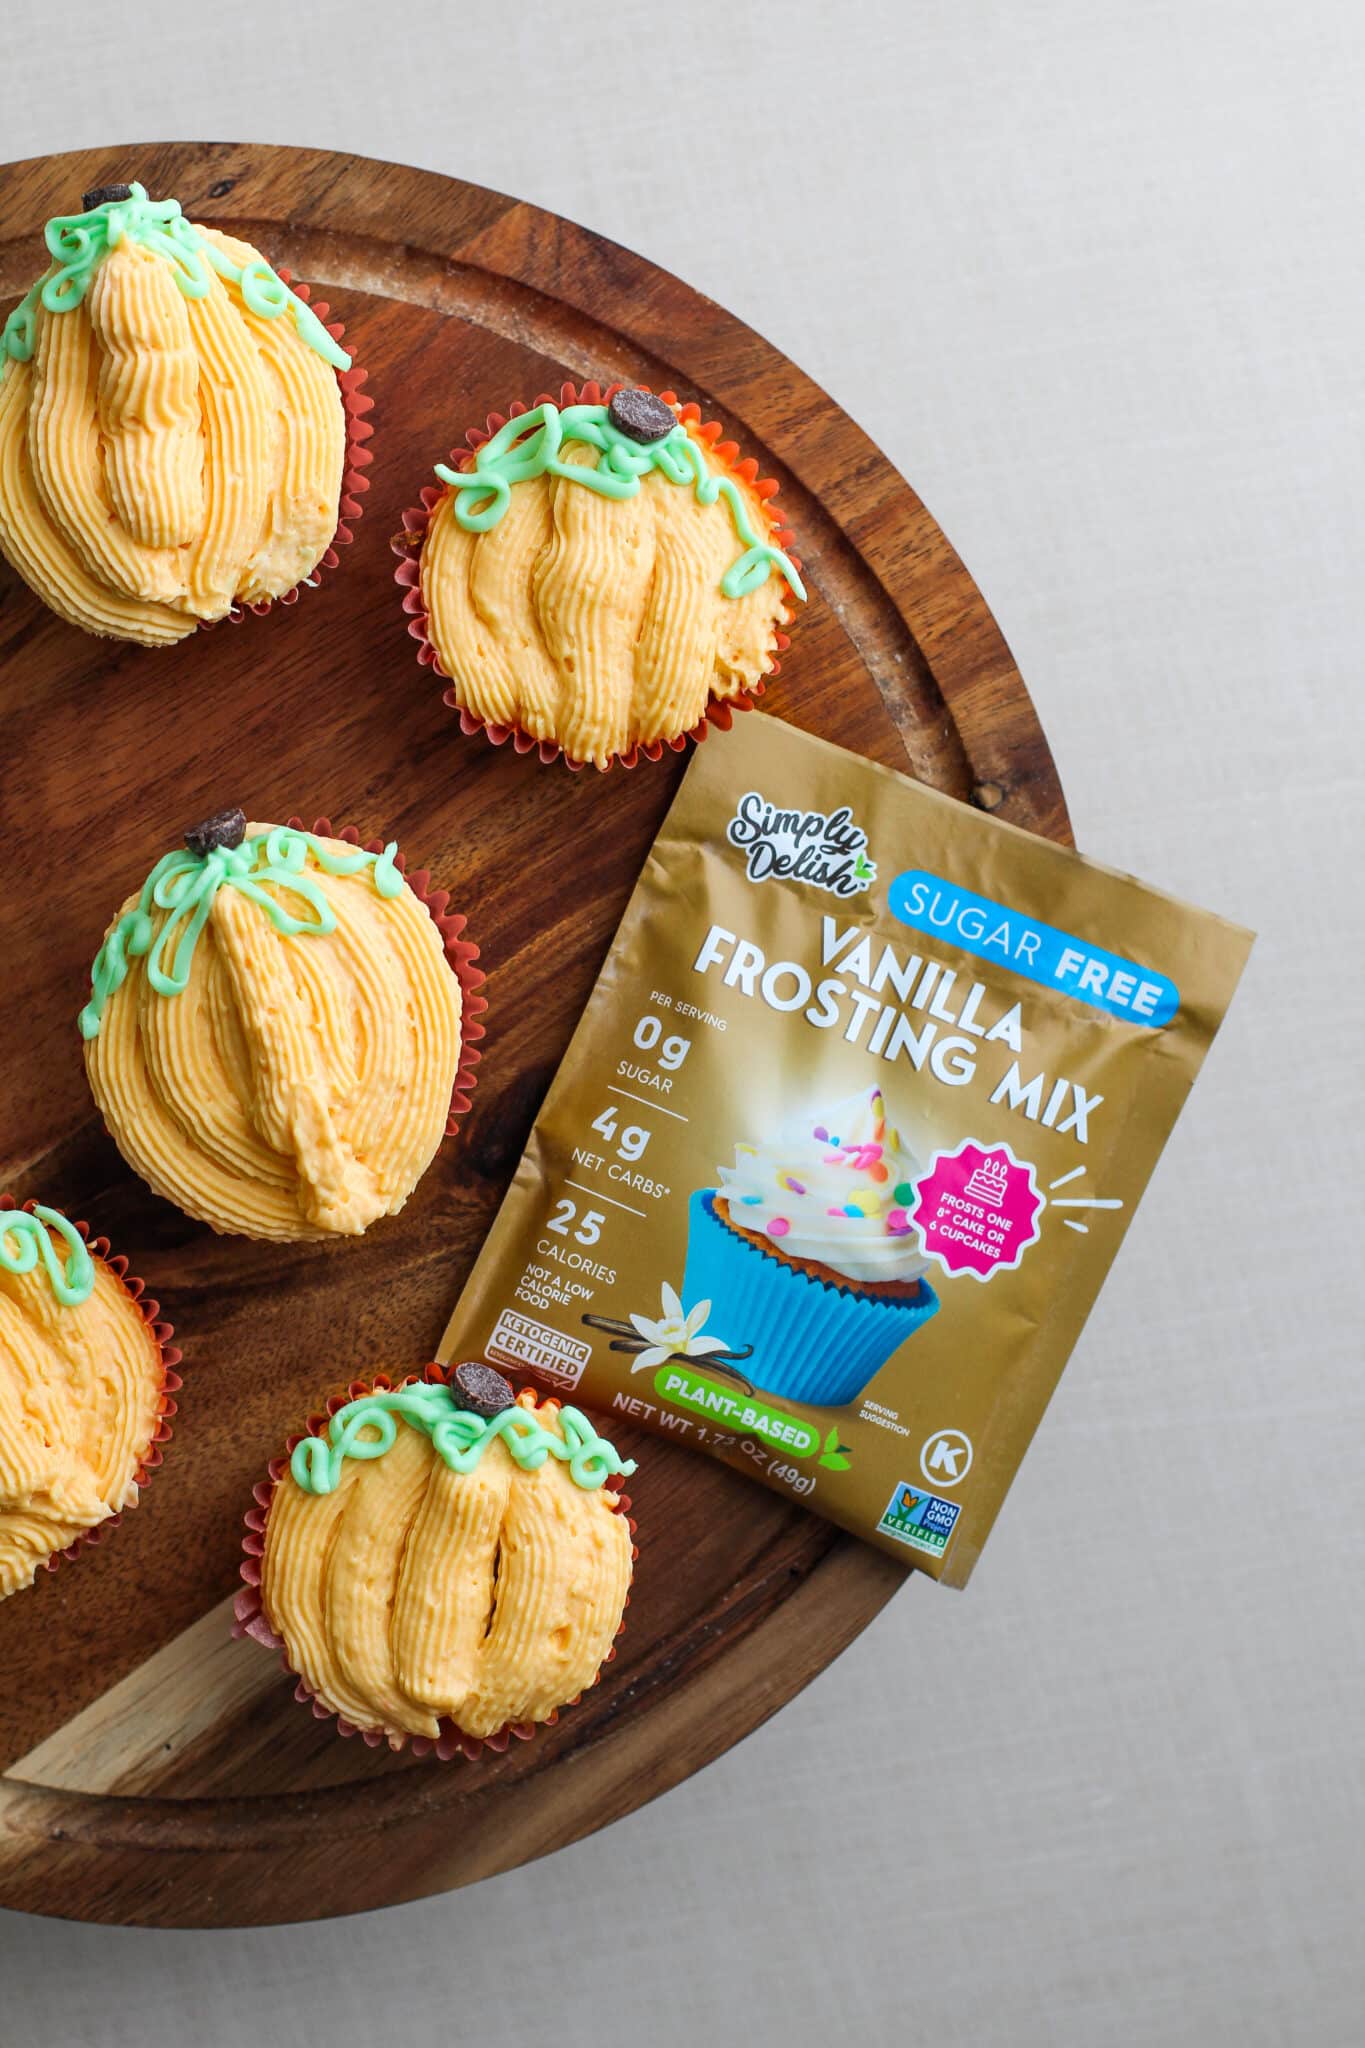 Simply Delish Pumpkin Cream Cheese Muffins by @klean.kate Featured Image